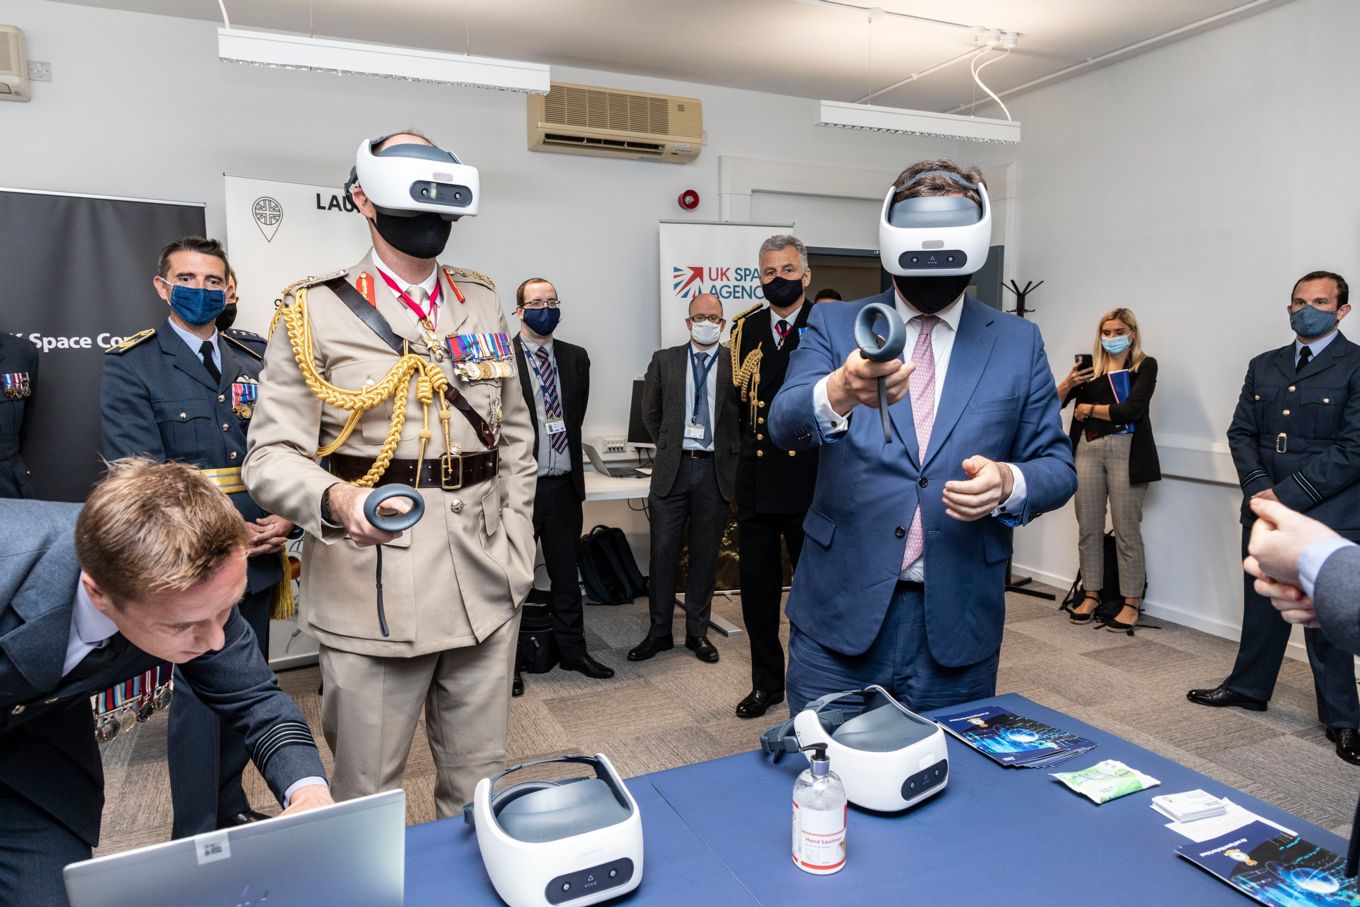 Attendants interact with Virtual Reality headsets and other gadgets.